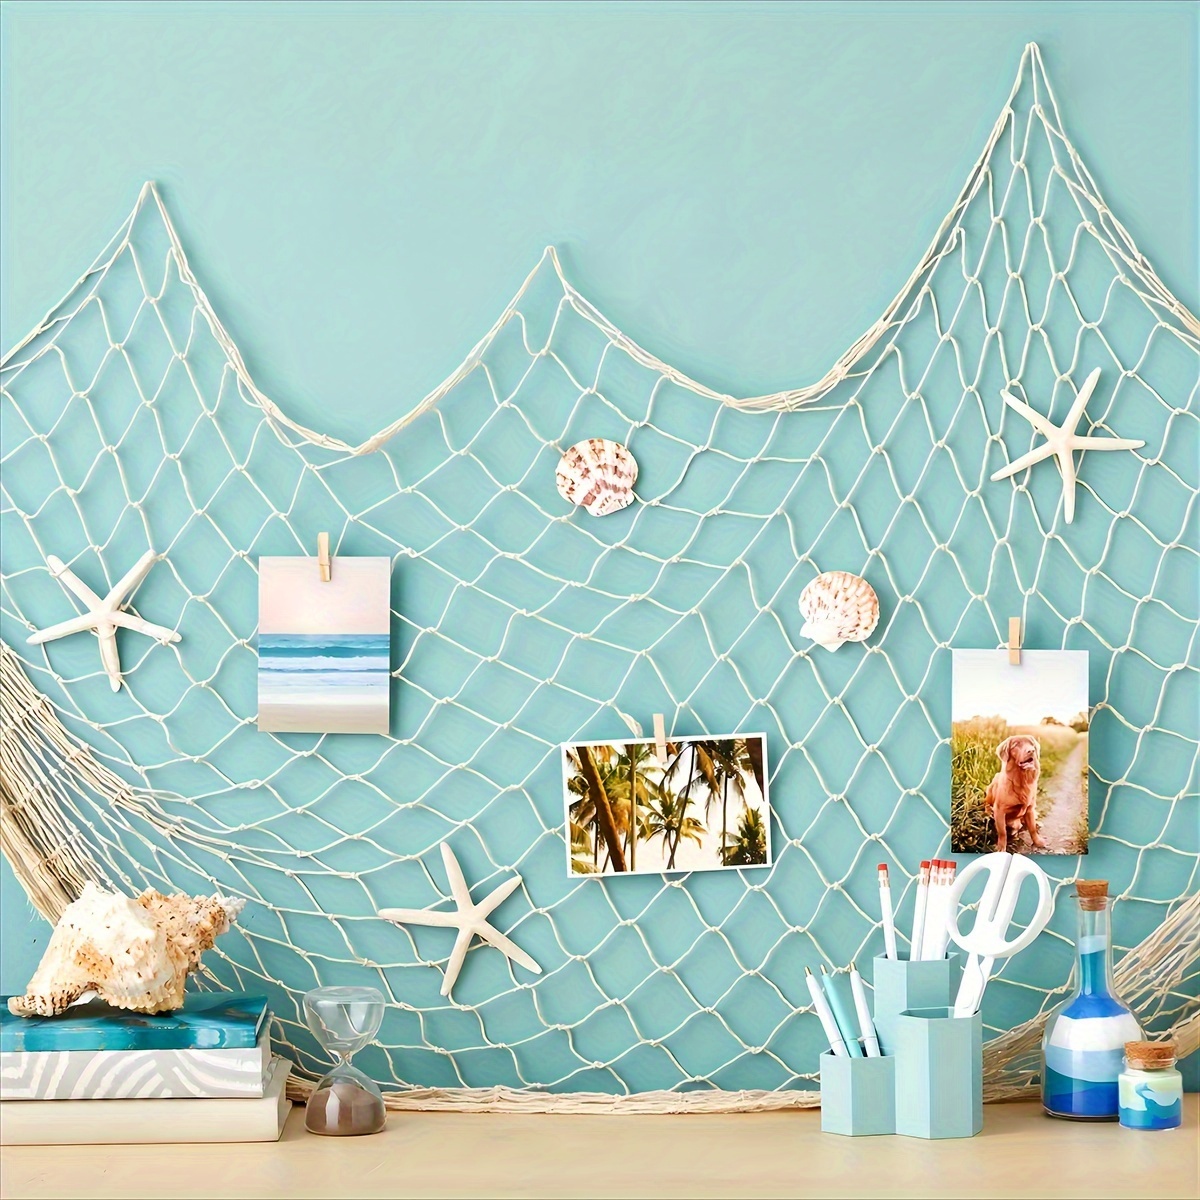 Fishing Net Decorations Wall Decor Mediterranean Style Fishing Net For  Nautical Themed Room Decor 